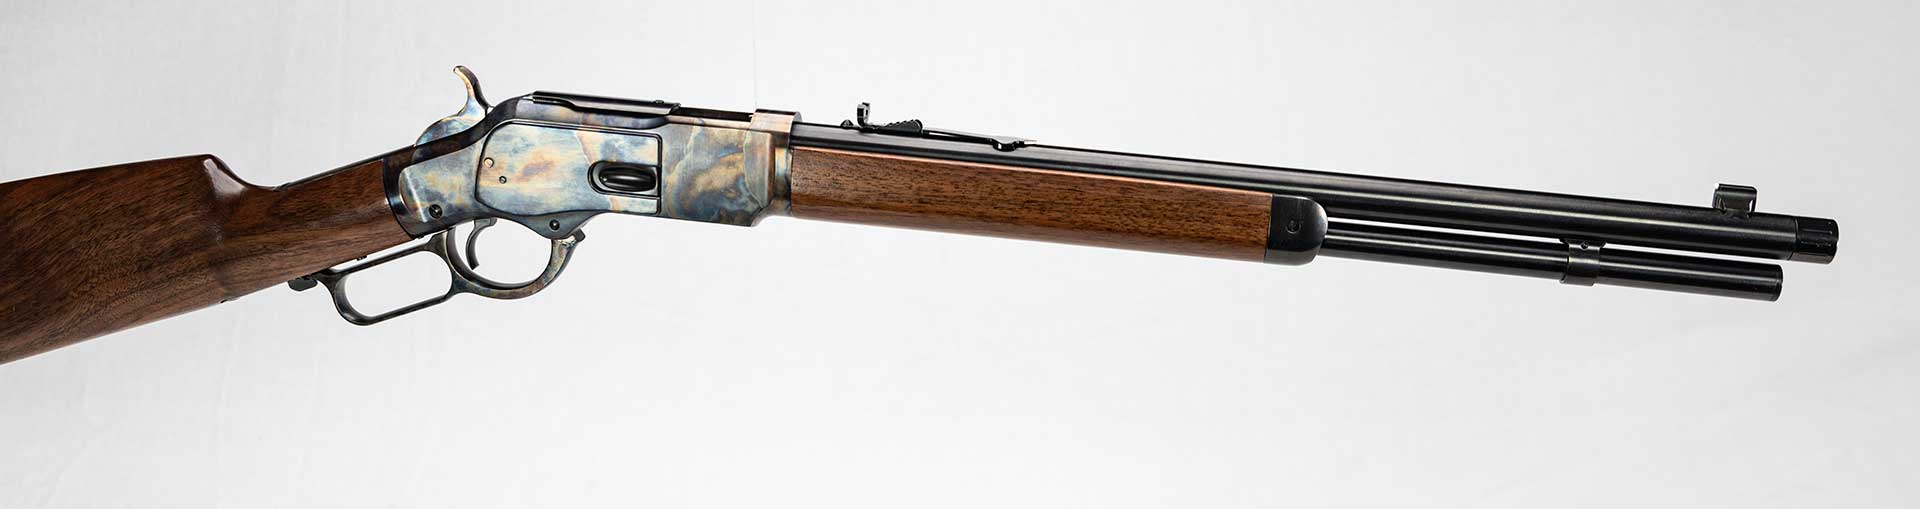 Right side of the Taylor's & Company TC73 lever-action rifle.